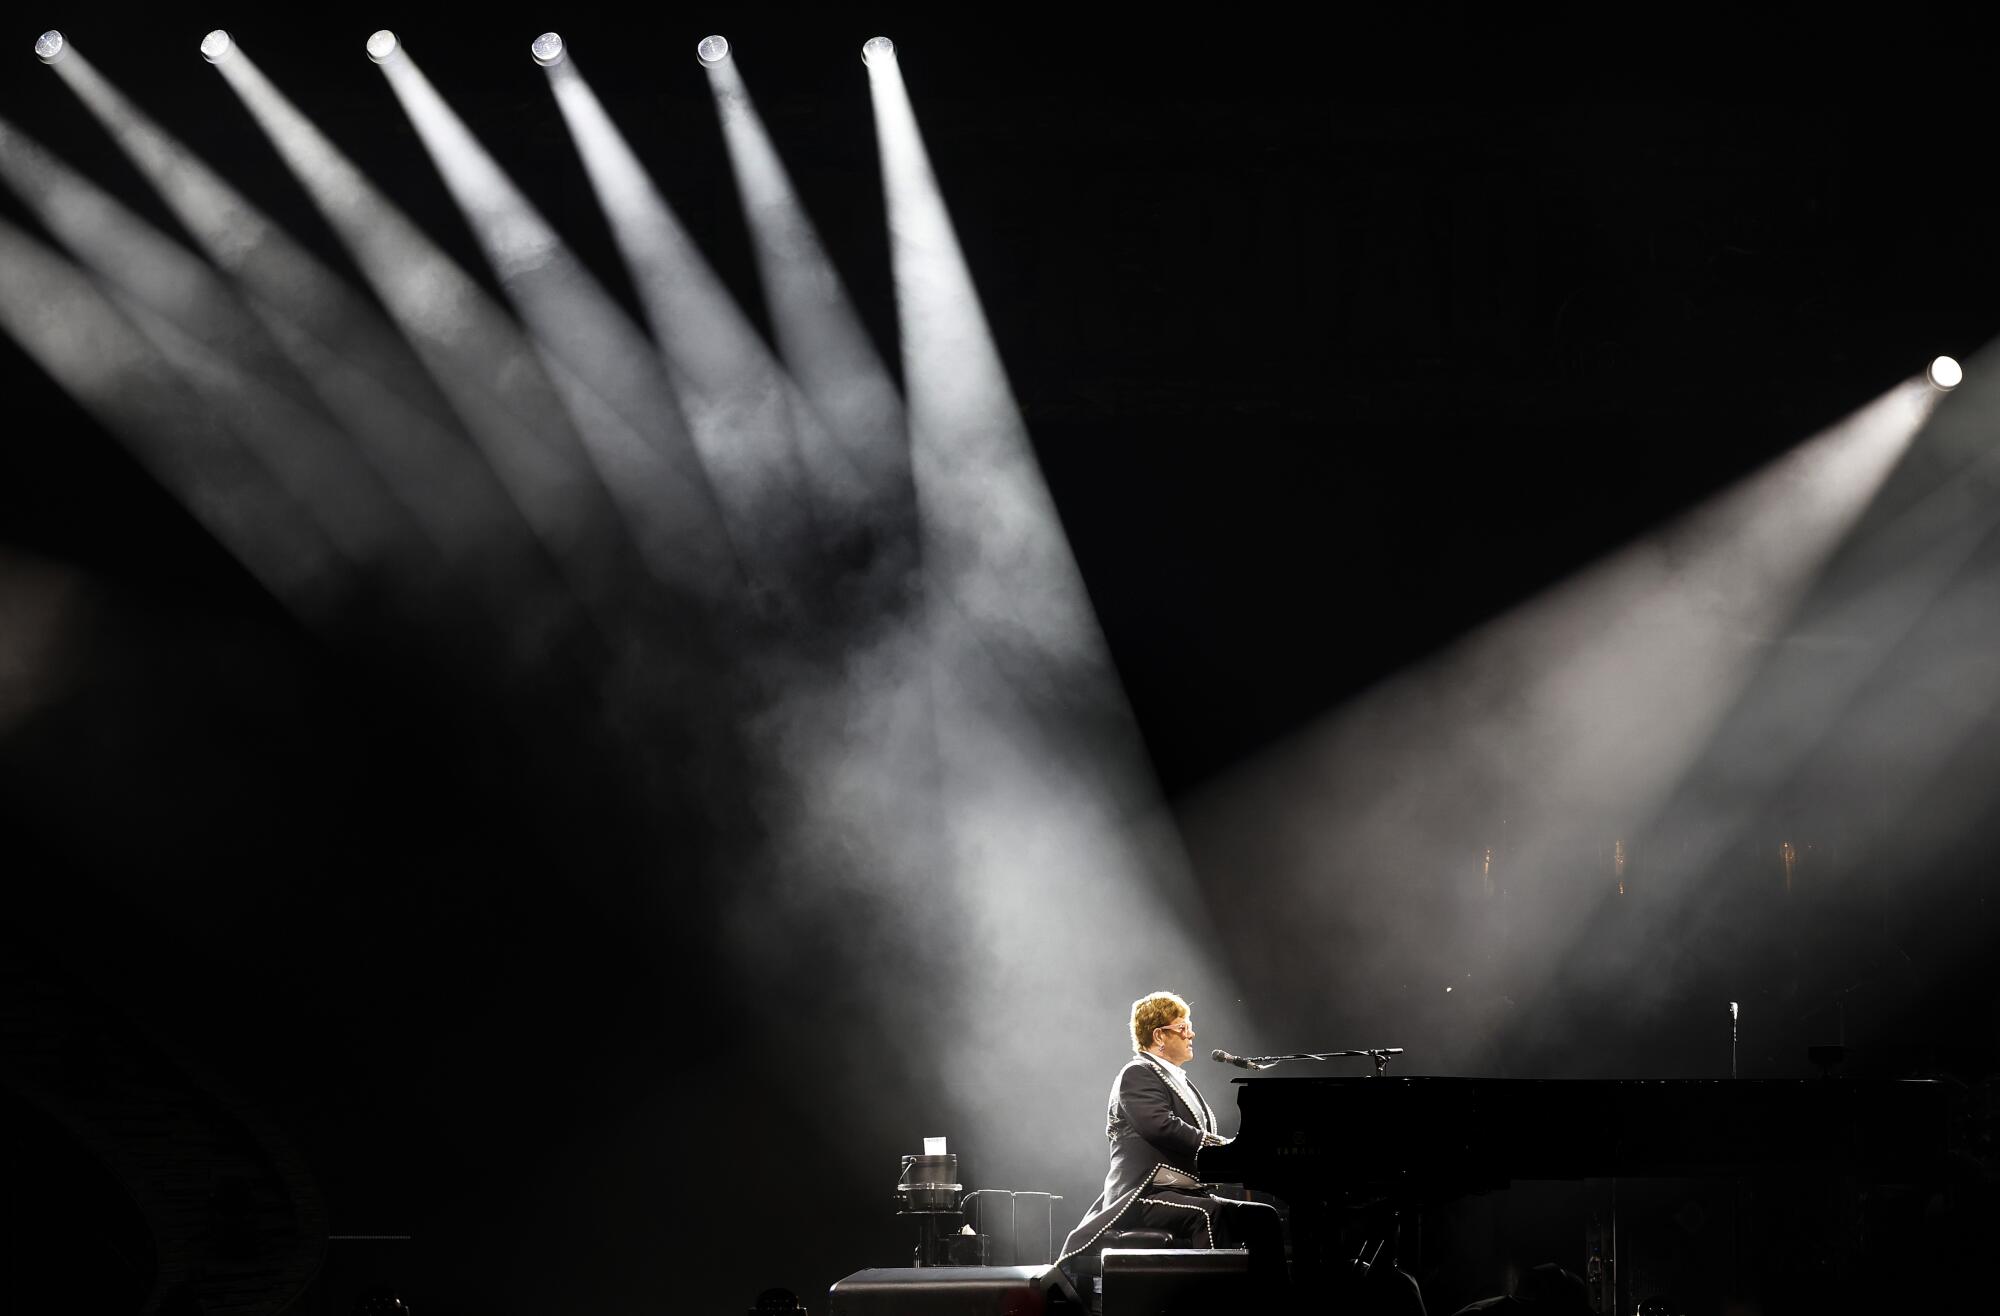 Elton John has created his own 'Roblox' land that will host a virtual gig